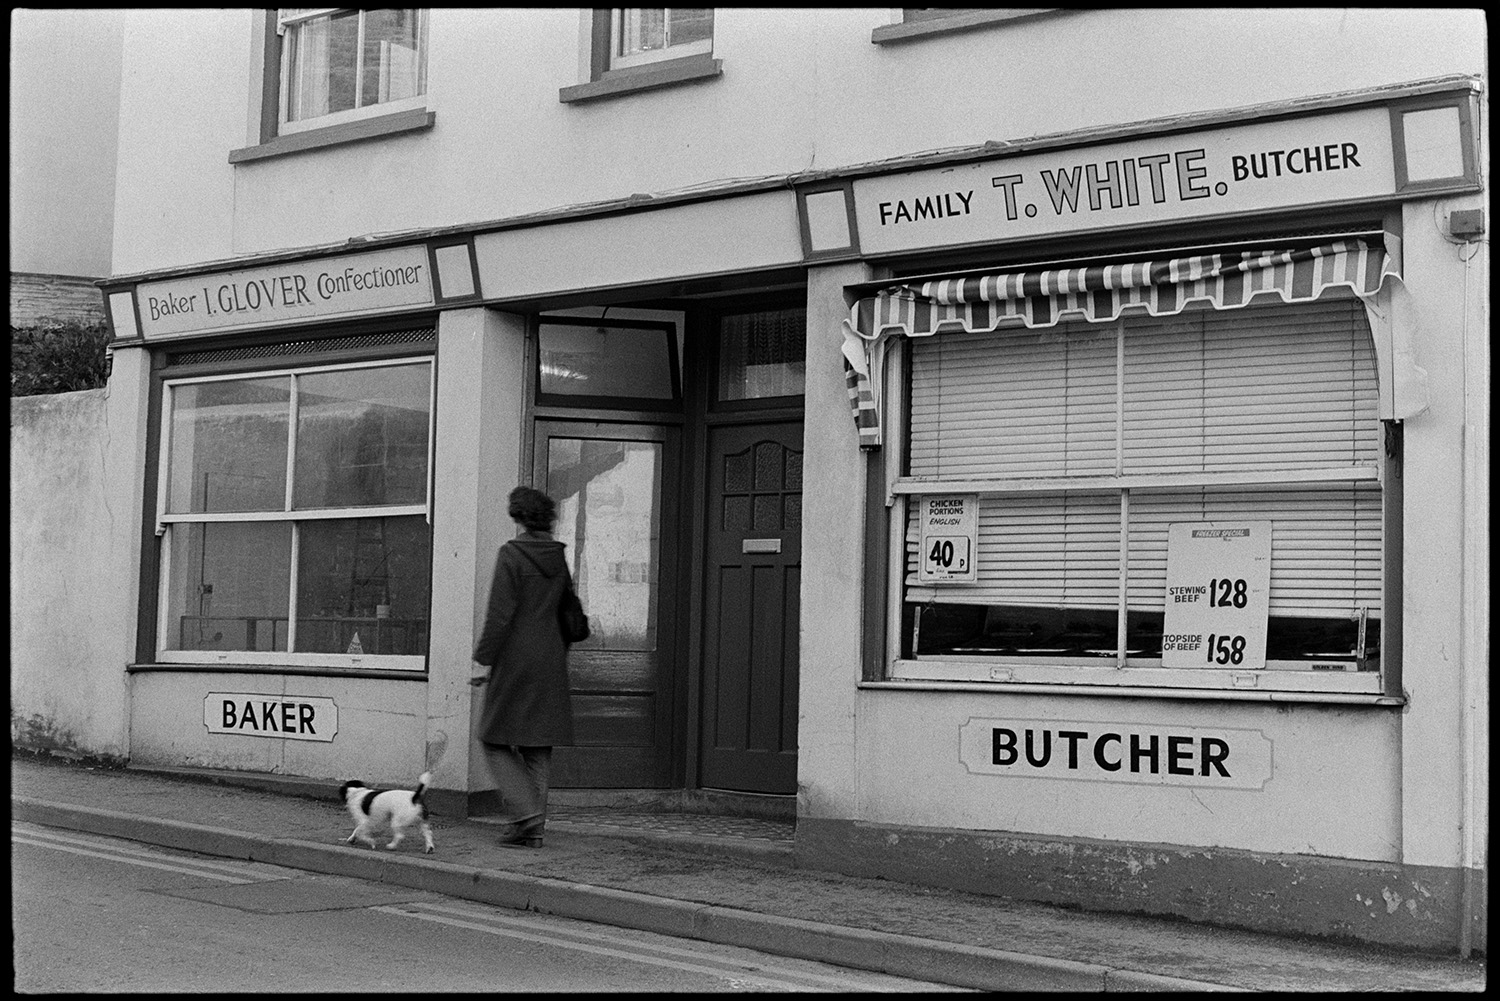 Street scenes with butcher, baker and pub front with sign. 
[A person walking a dog past the shop fronts of T White, butcher and I Glover, Baker, in Bideford.]